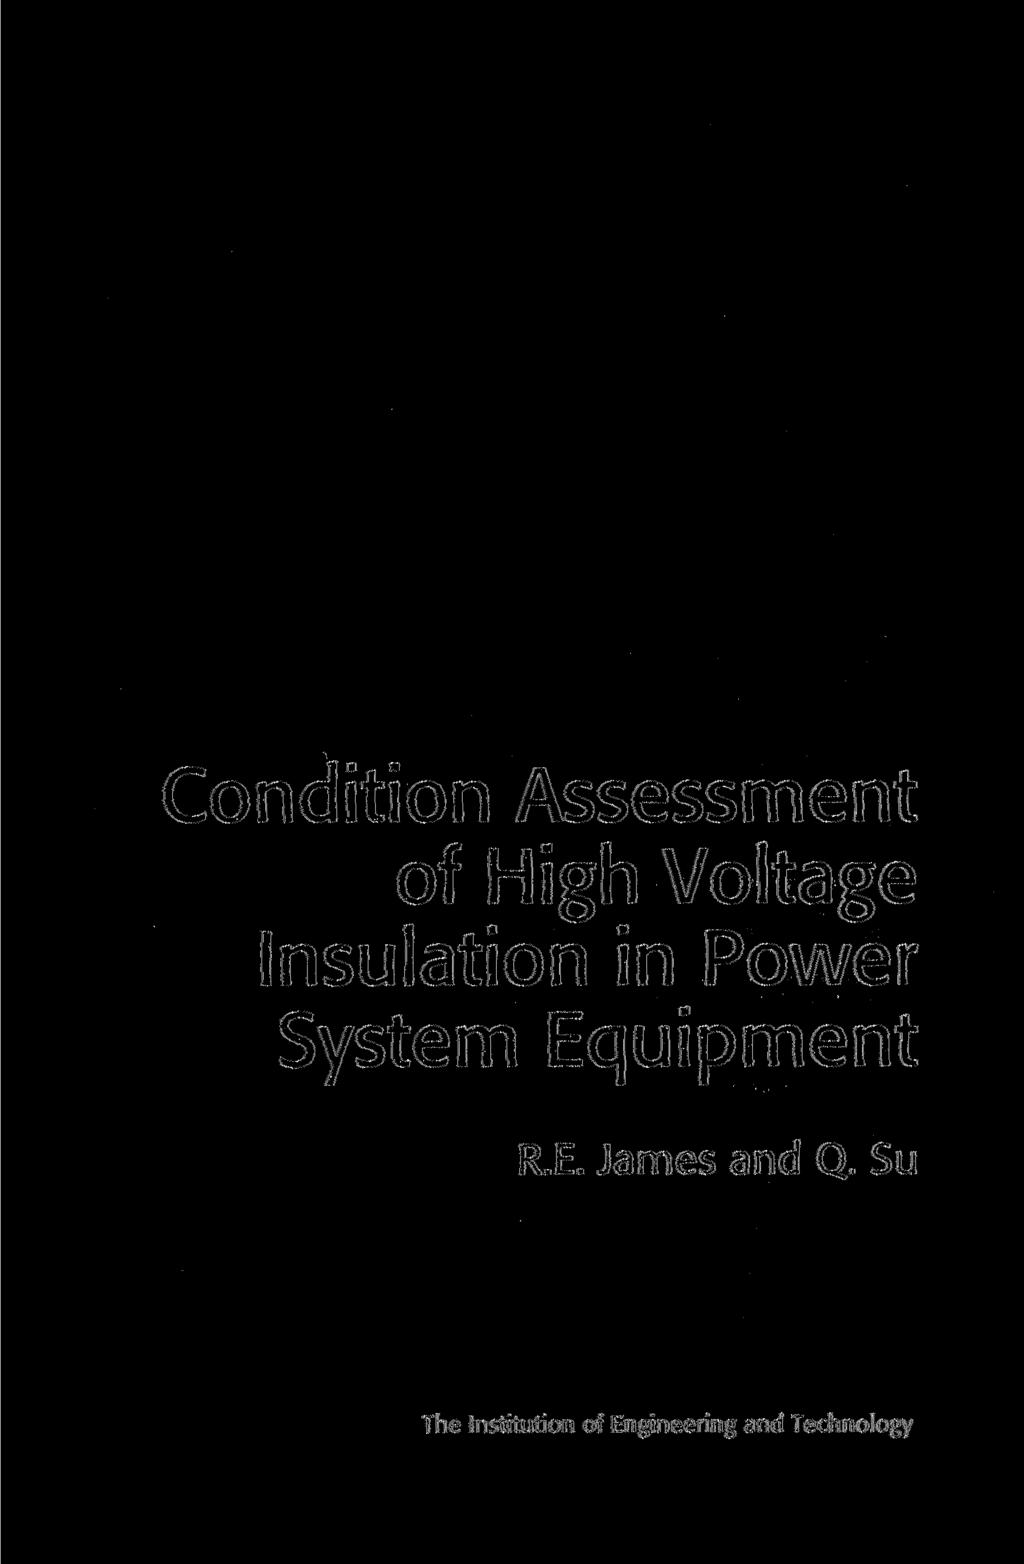 Condition Assessment of High Voltage Insulation in Power System